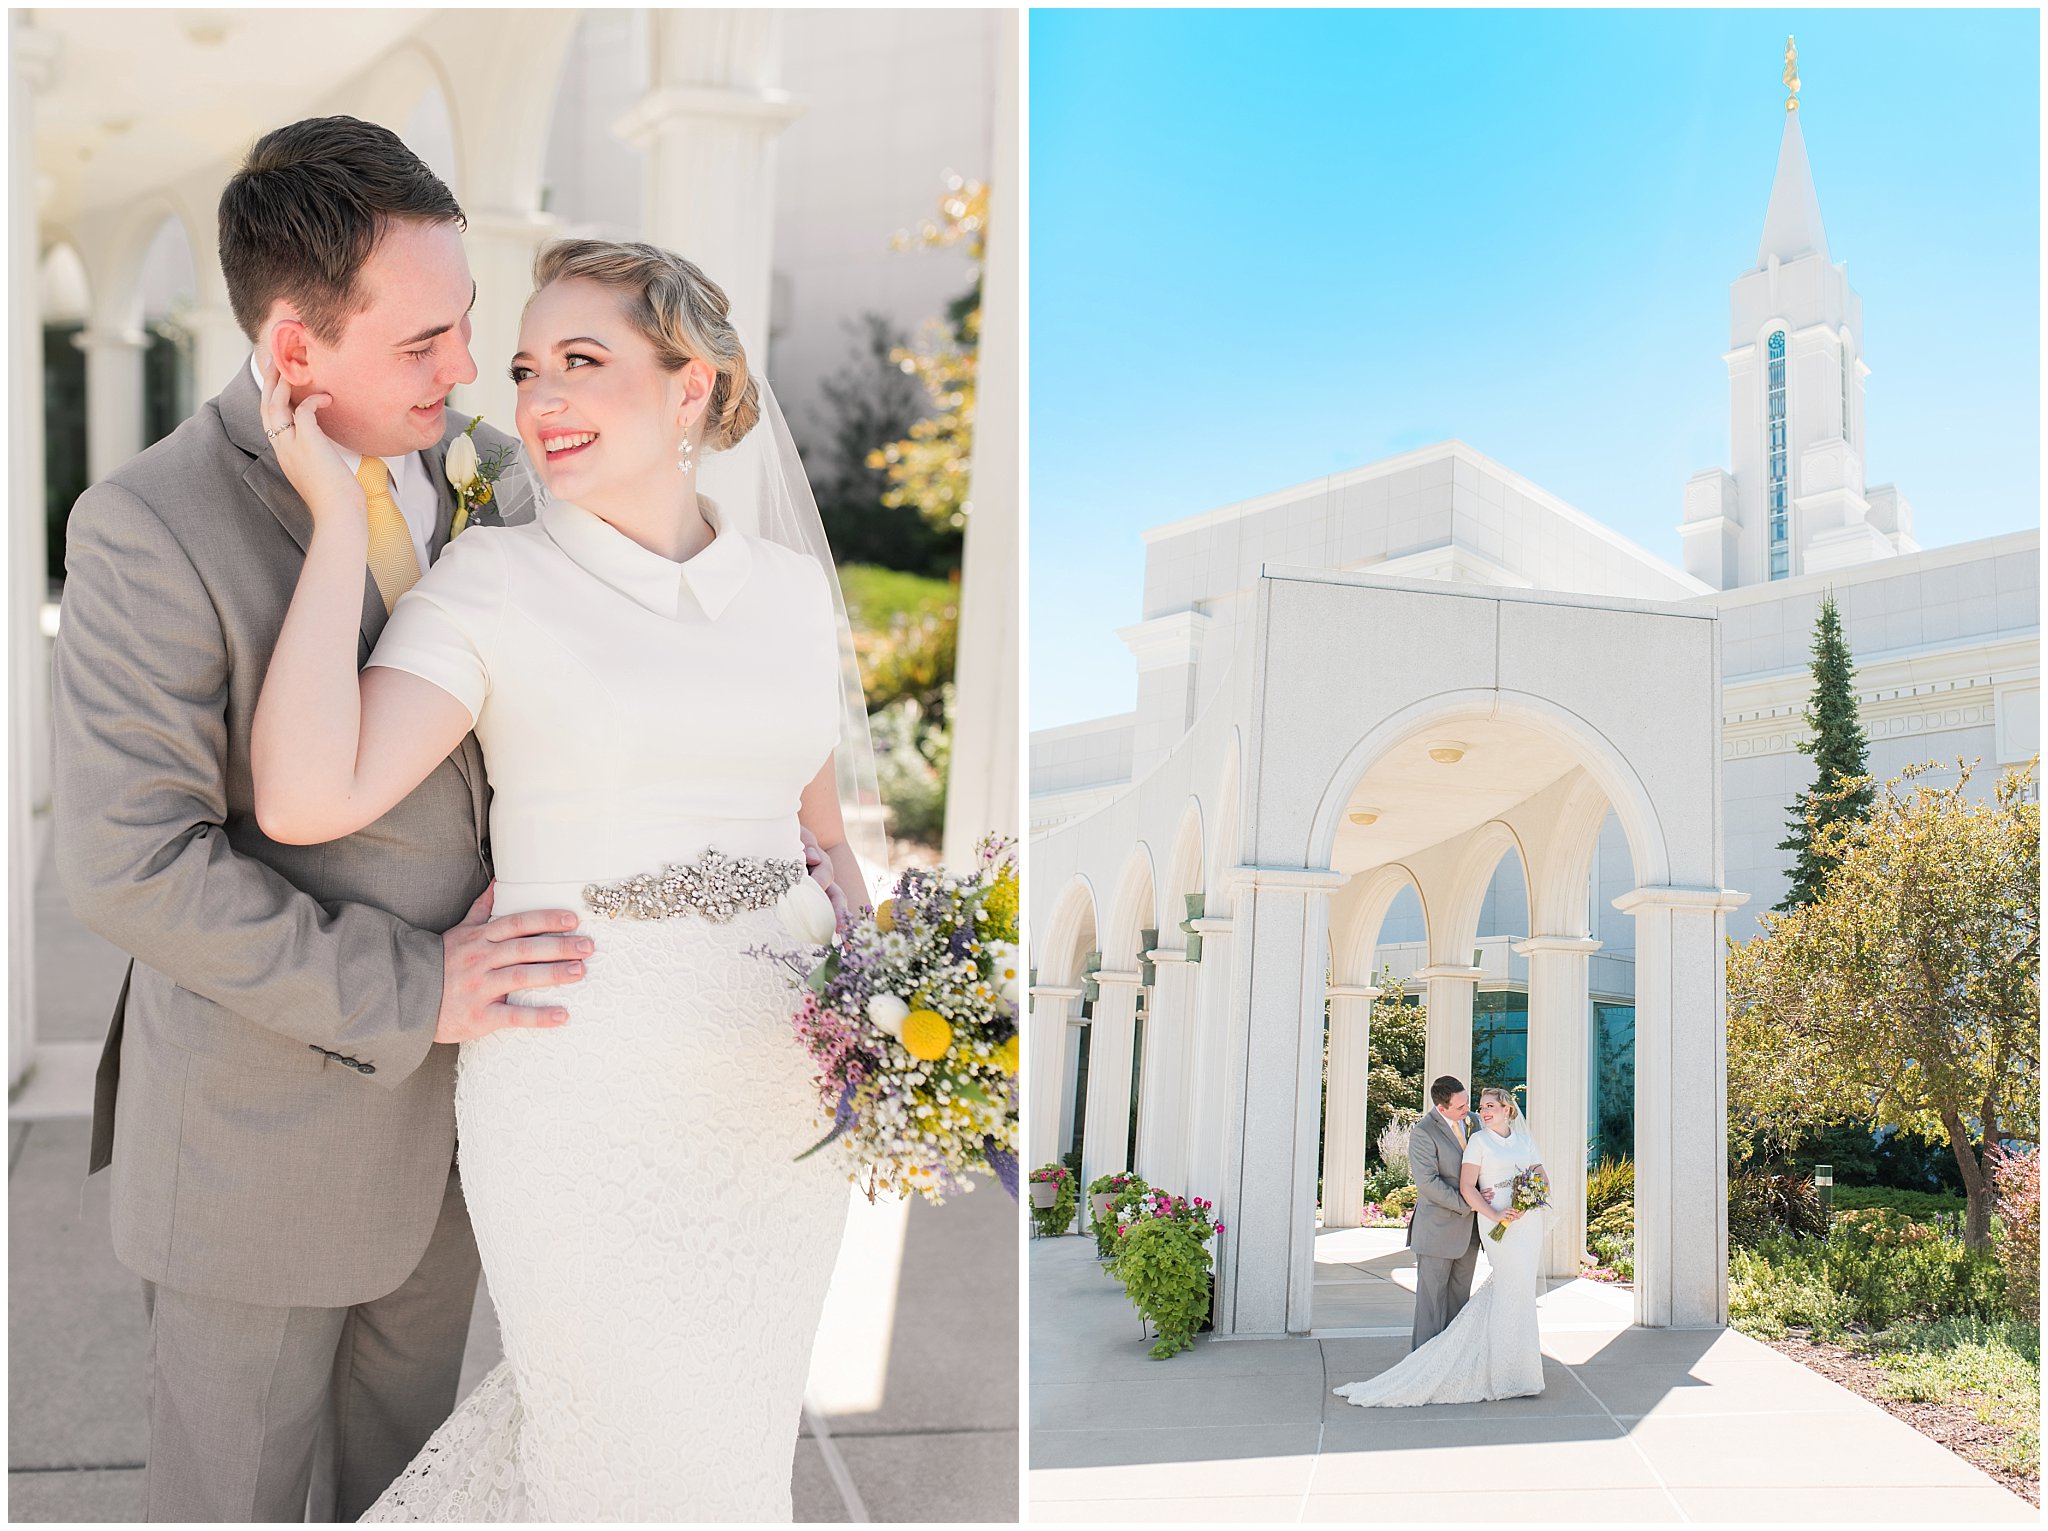 Bride and groom vintage wedding portraits at the Bountiful Temple in the summer with wildflower bouquet | Fountain View Event Venue and Bountiful Temple Wedding | Jessie and Dallin Photography